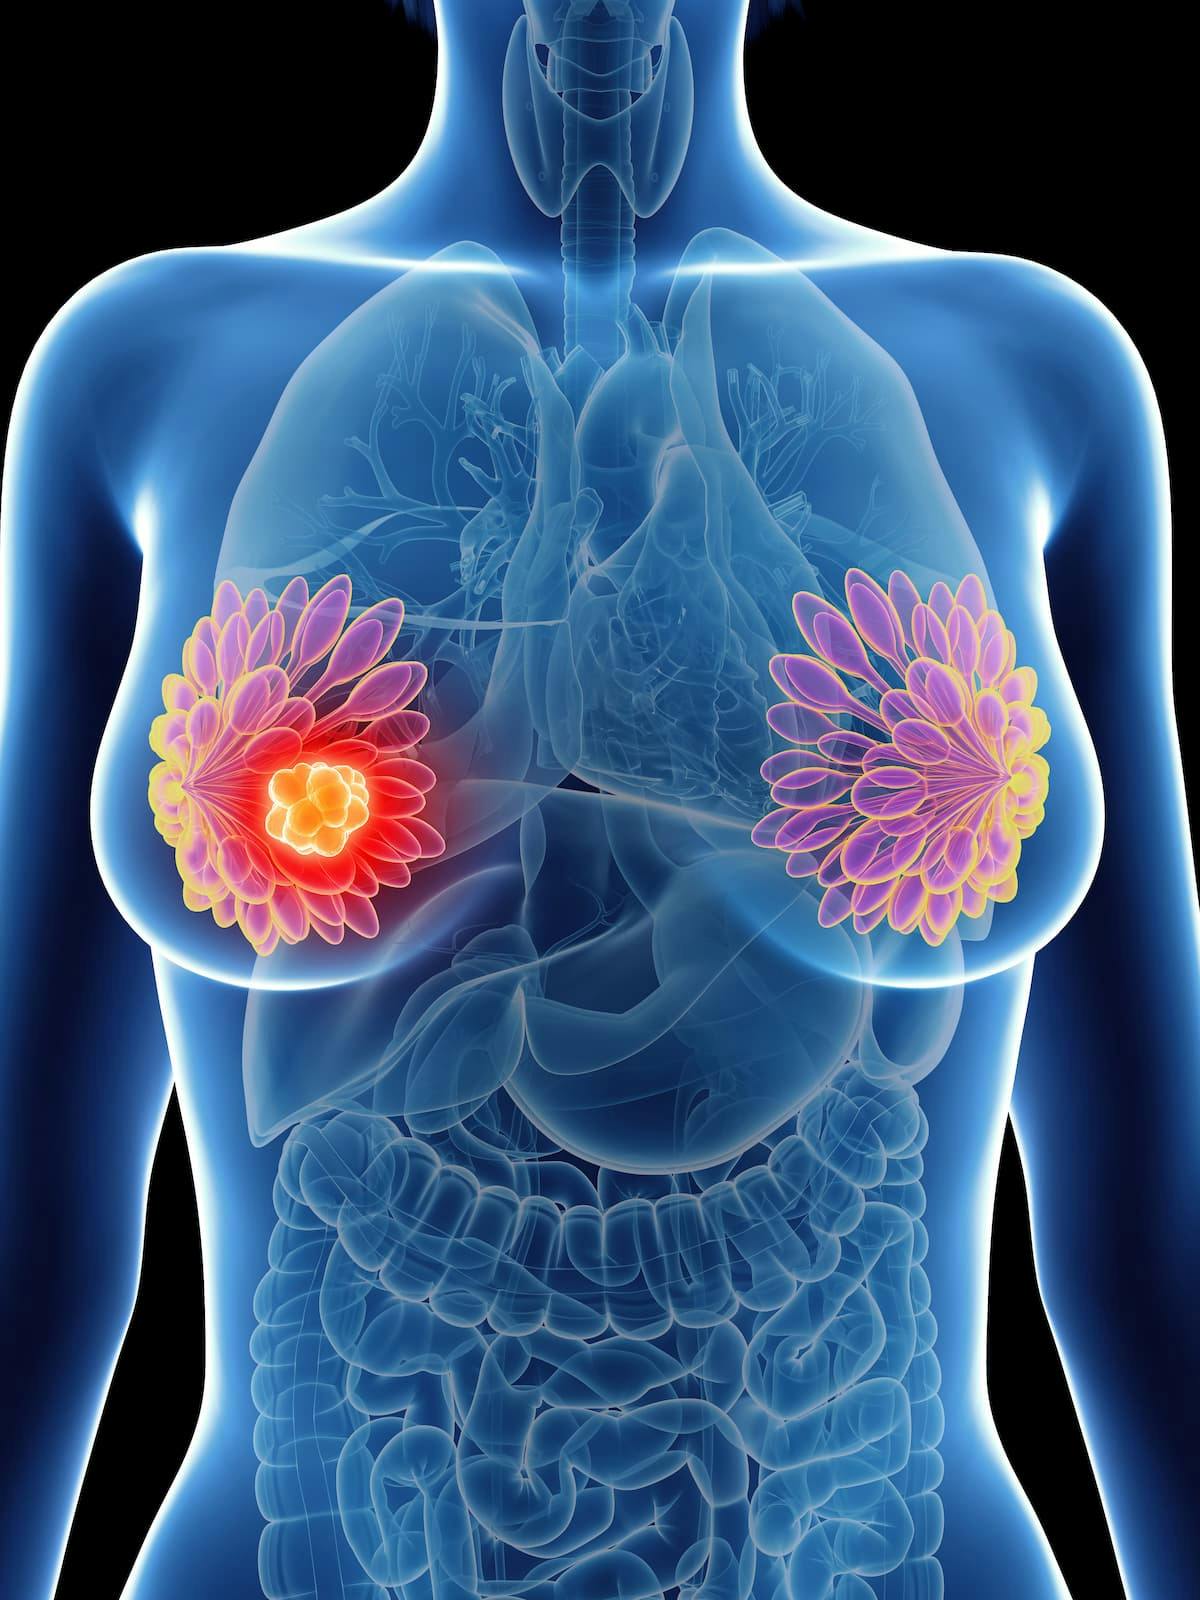 Switch treatment with palbociclib and fulvestrant from aromatase inhibitors plus palbociclib upon onset of ESR1 blood mutations and before progression yielded better progression-free survival among those with estrogen receptor–positive, HER2-negative advanced breast cancer. 